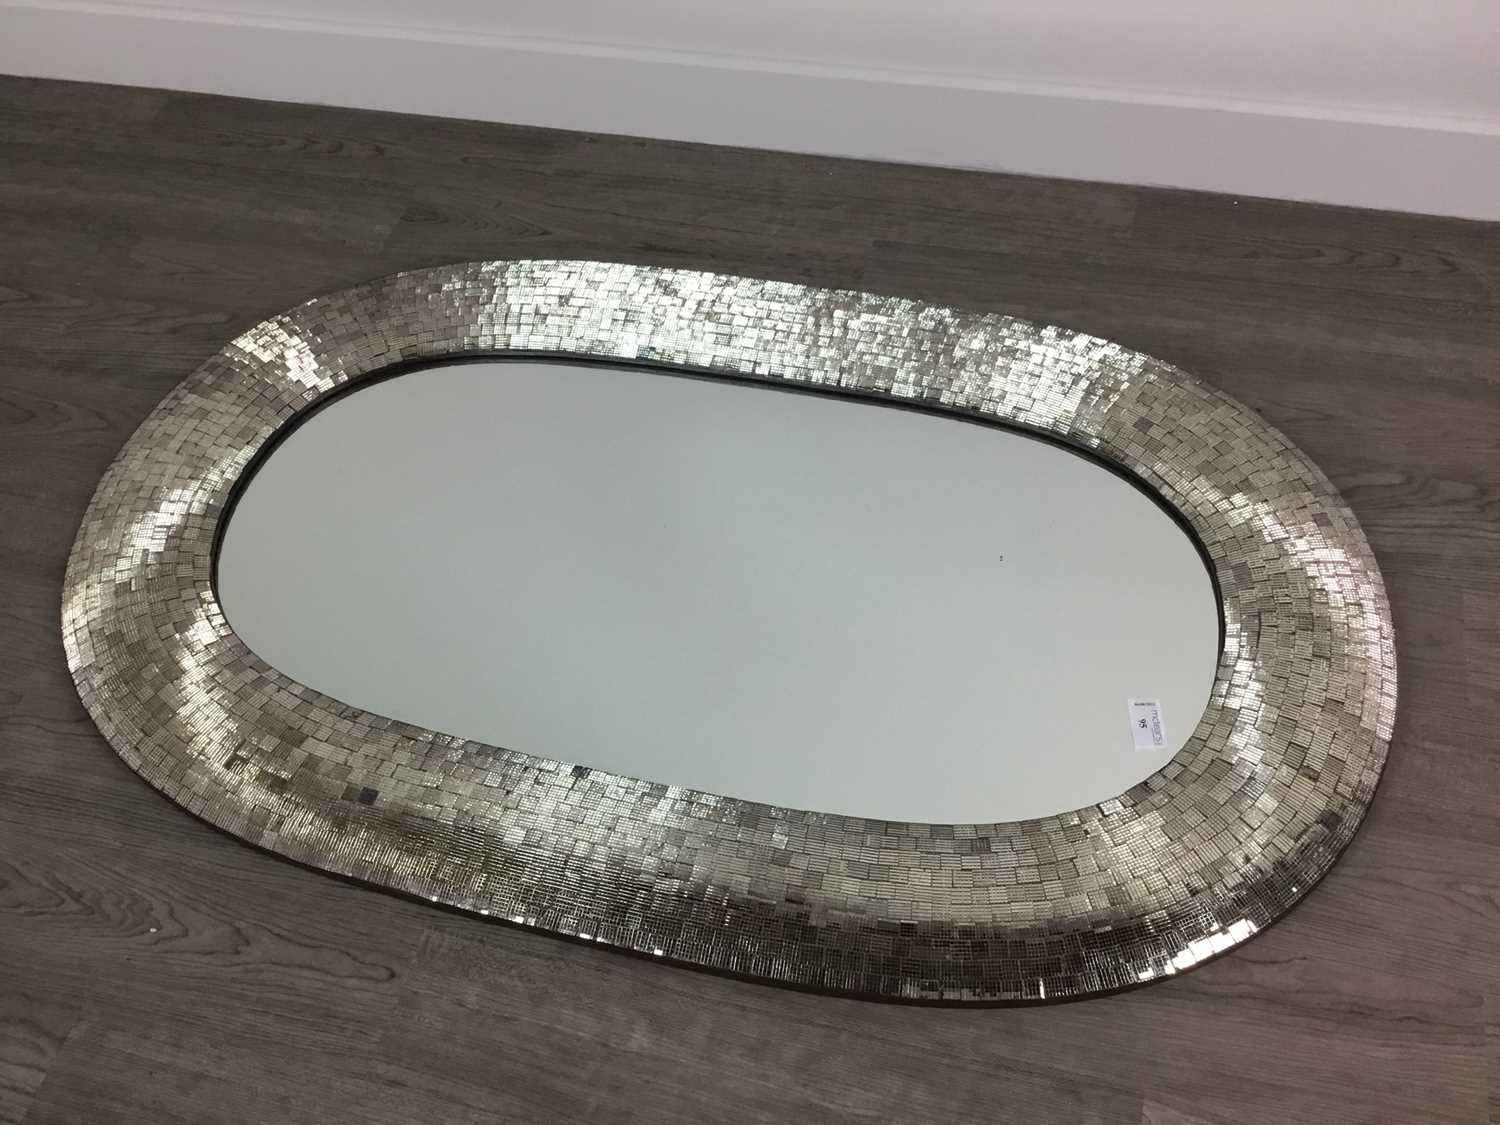 Lot 95 - A MODERN OVAL WALL MIRROR IN A MIRRORED MOSAIC TYPE FRAME